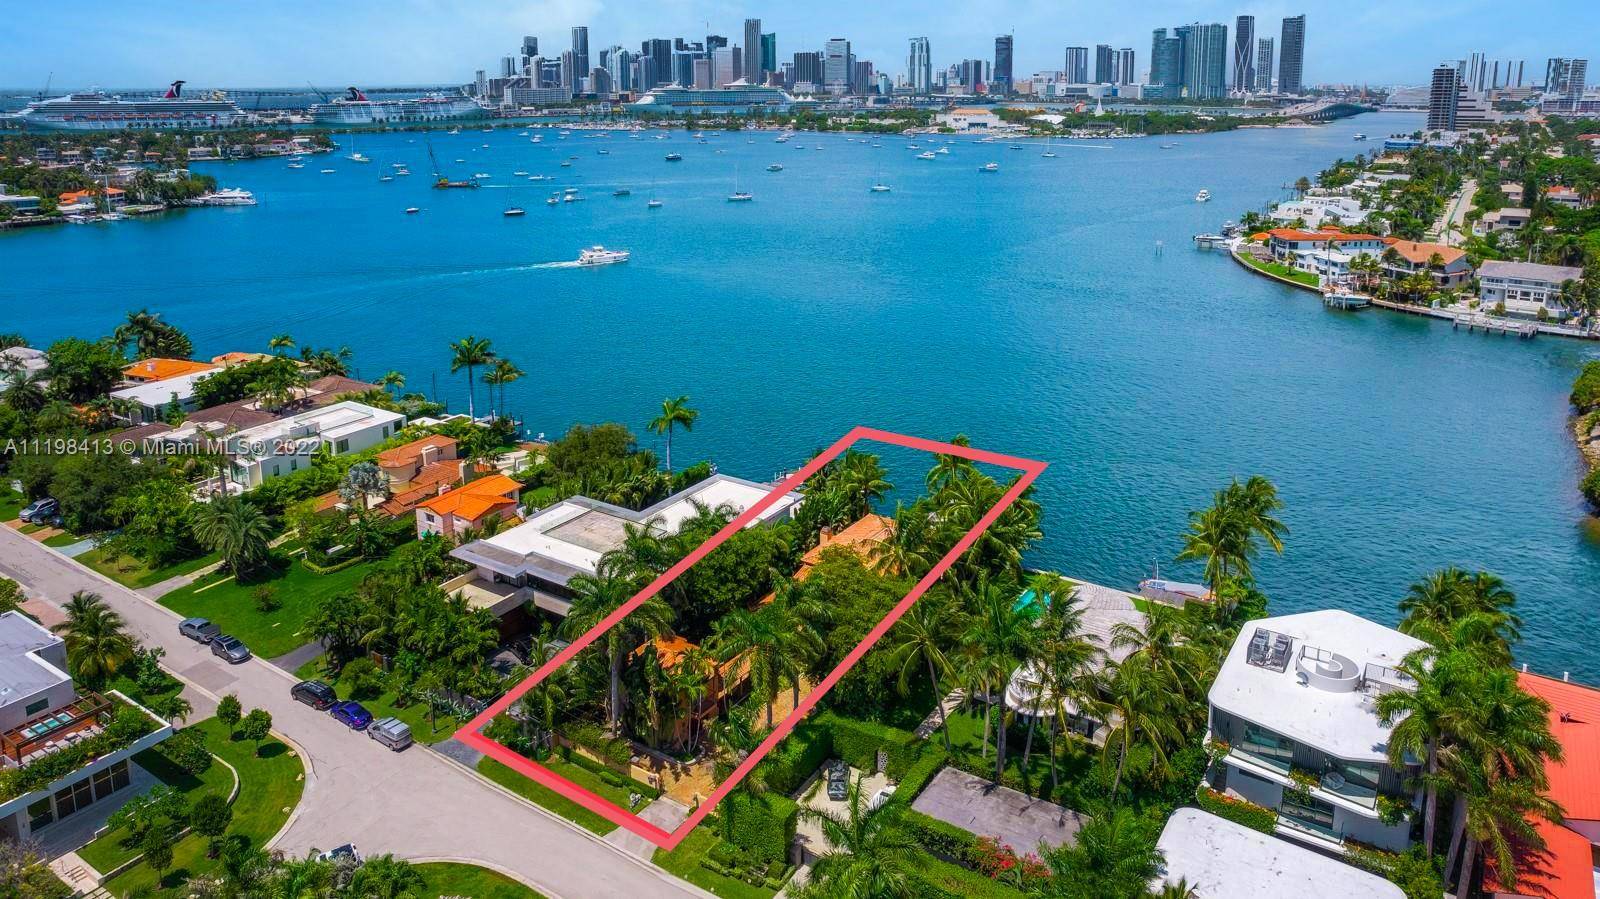 PRIME VENETIAN ISLANDS OPPORTUNITY ON SAN MARINO ISLAND TO RENOVATE OR BUILD YOUR DREAM WATERFRONT ESTATE ON THE WIDE BAY WITH DIRECT DOWNTOWN VIEWS !